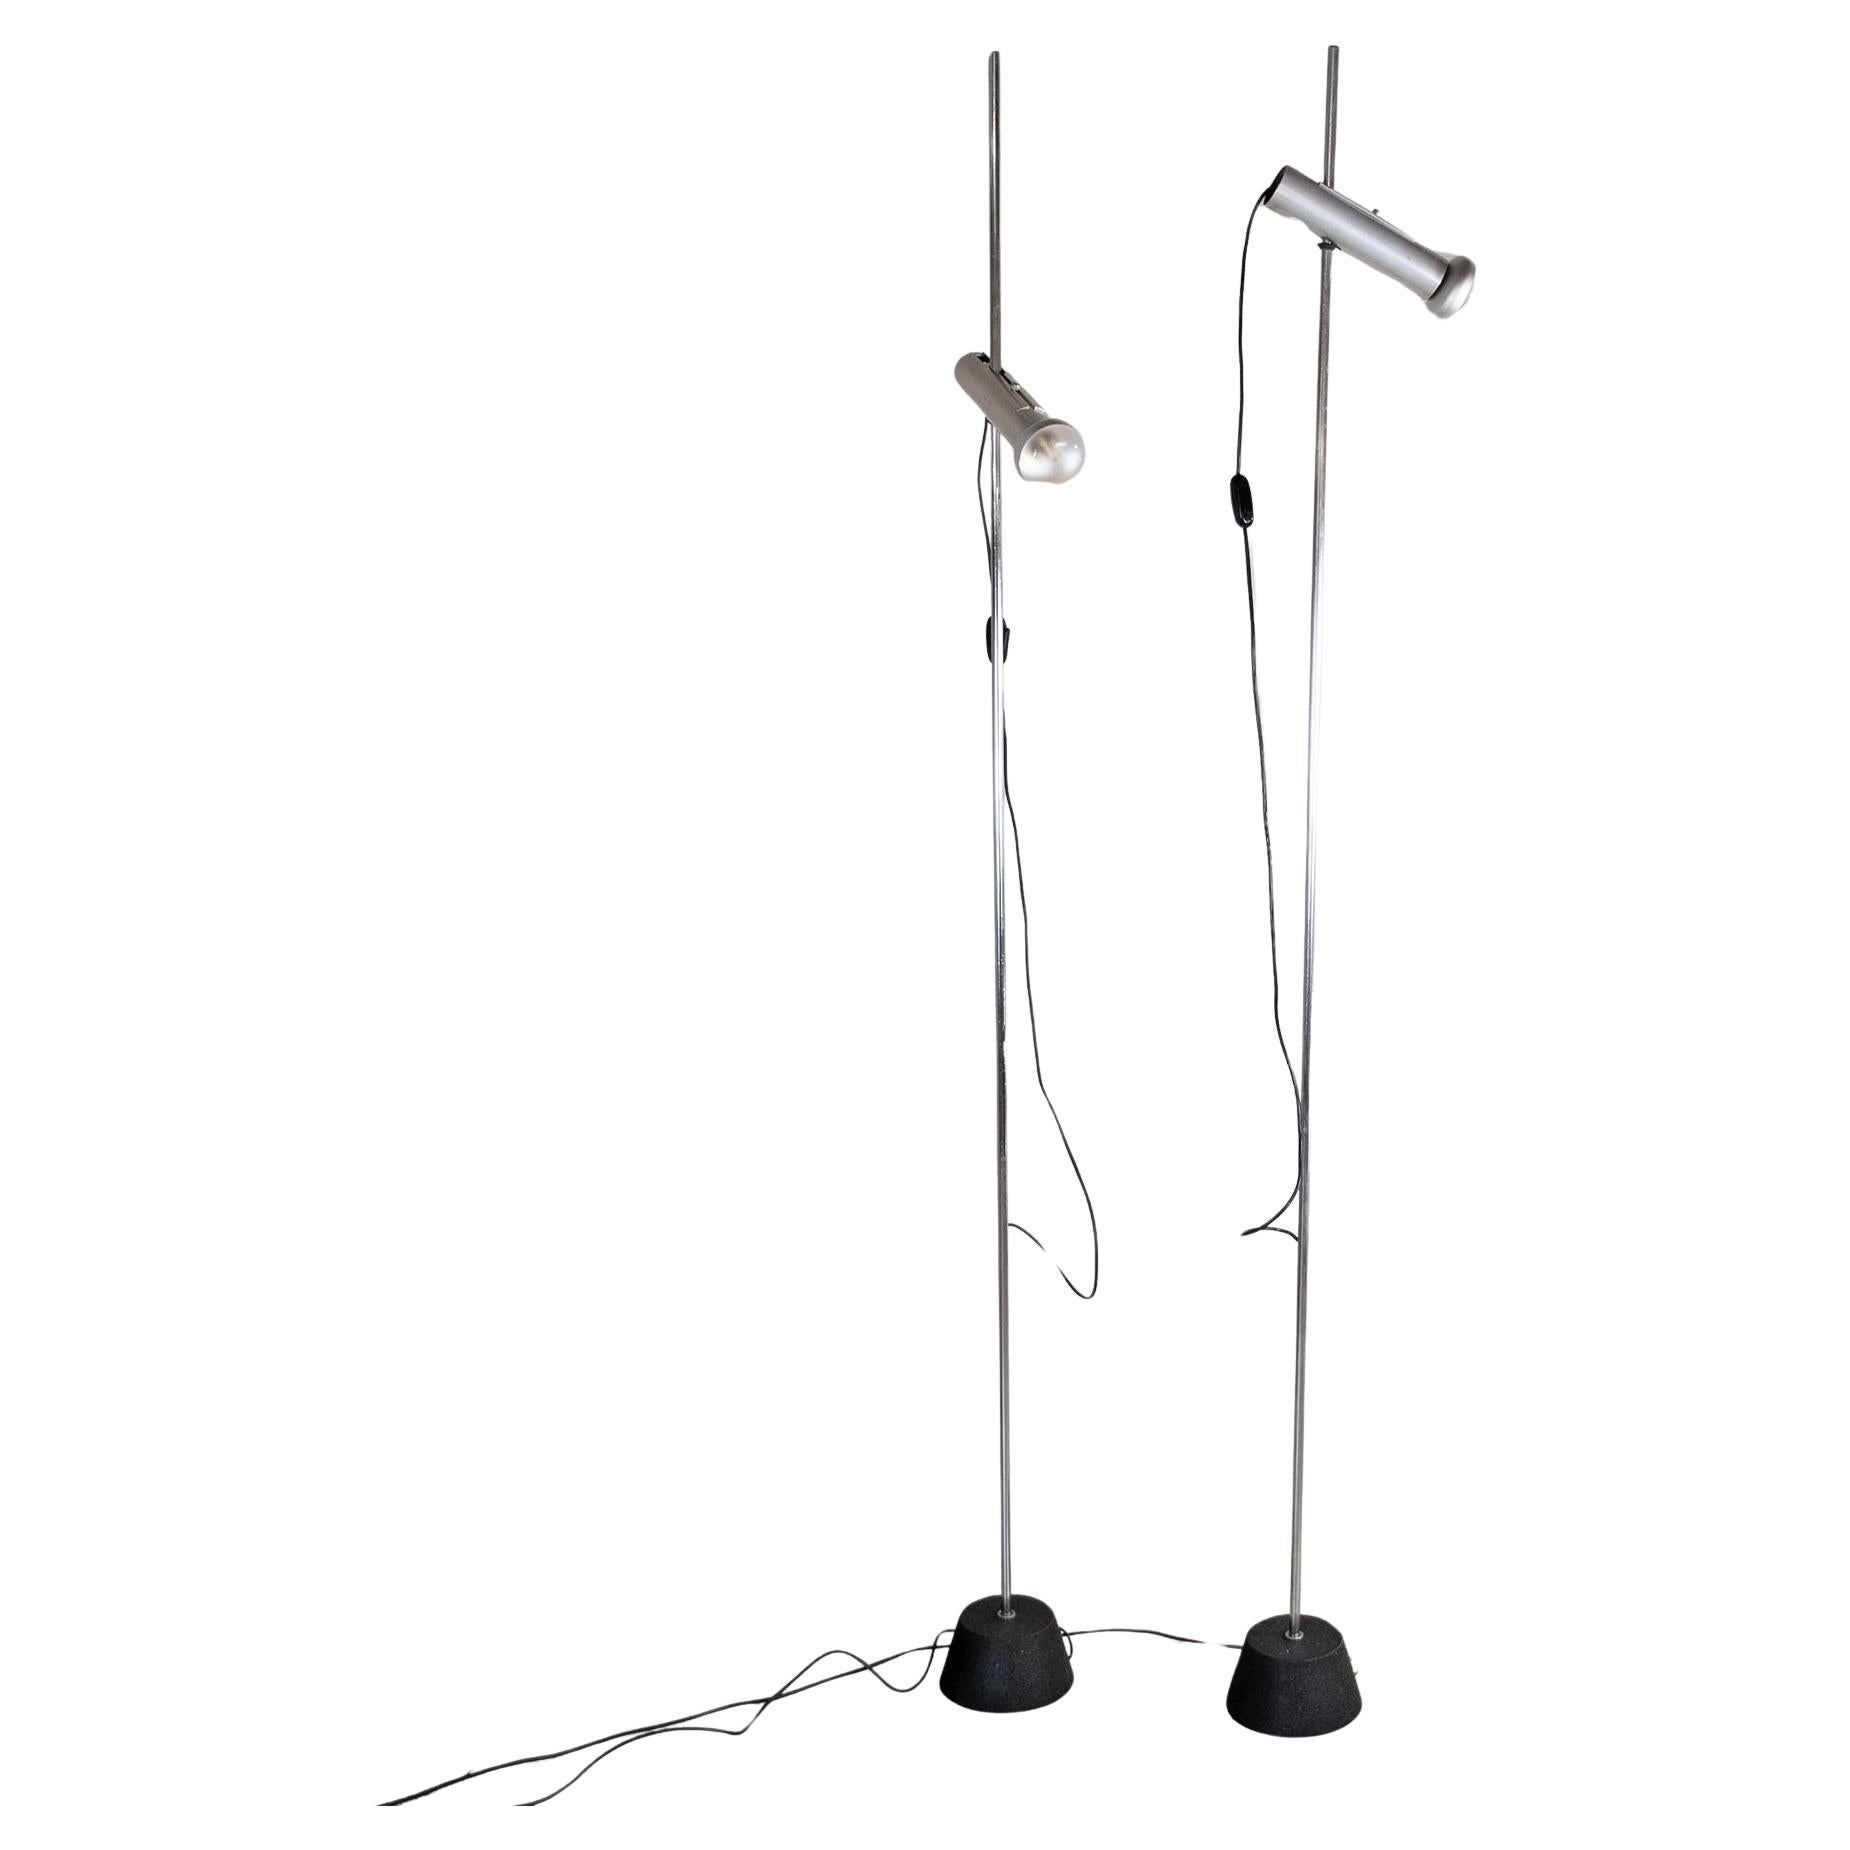 Gino Sarfatti pair of floor lamps model 1074 1950s For Sale